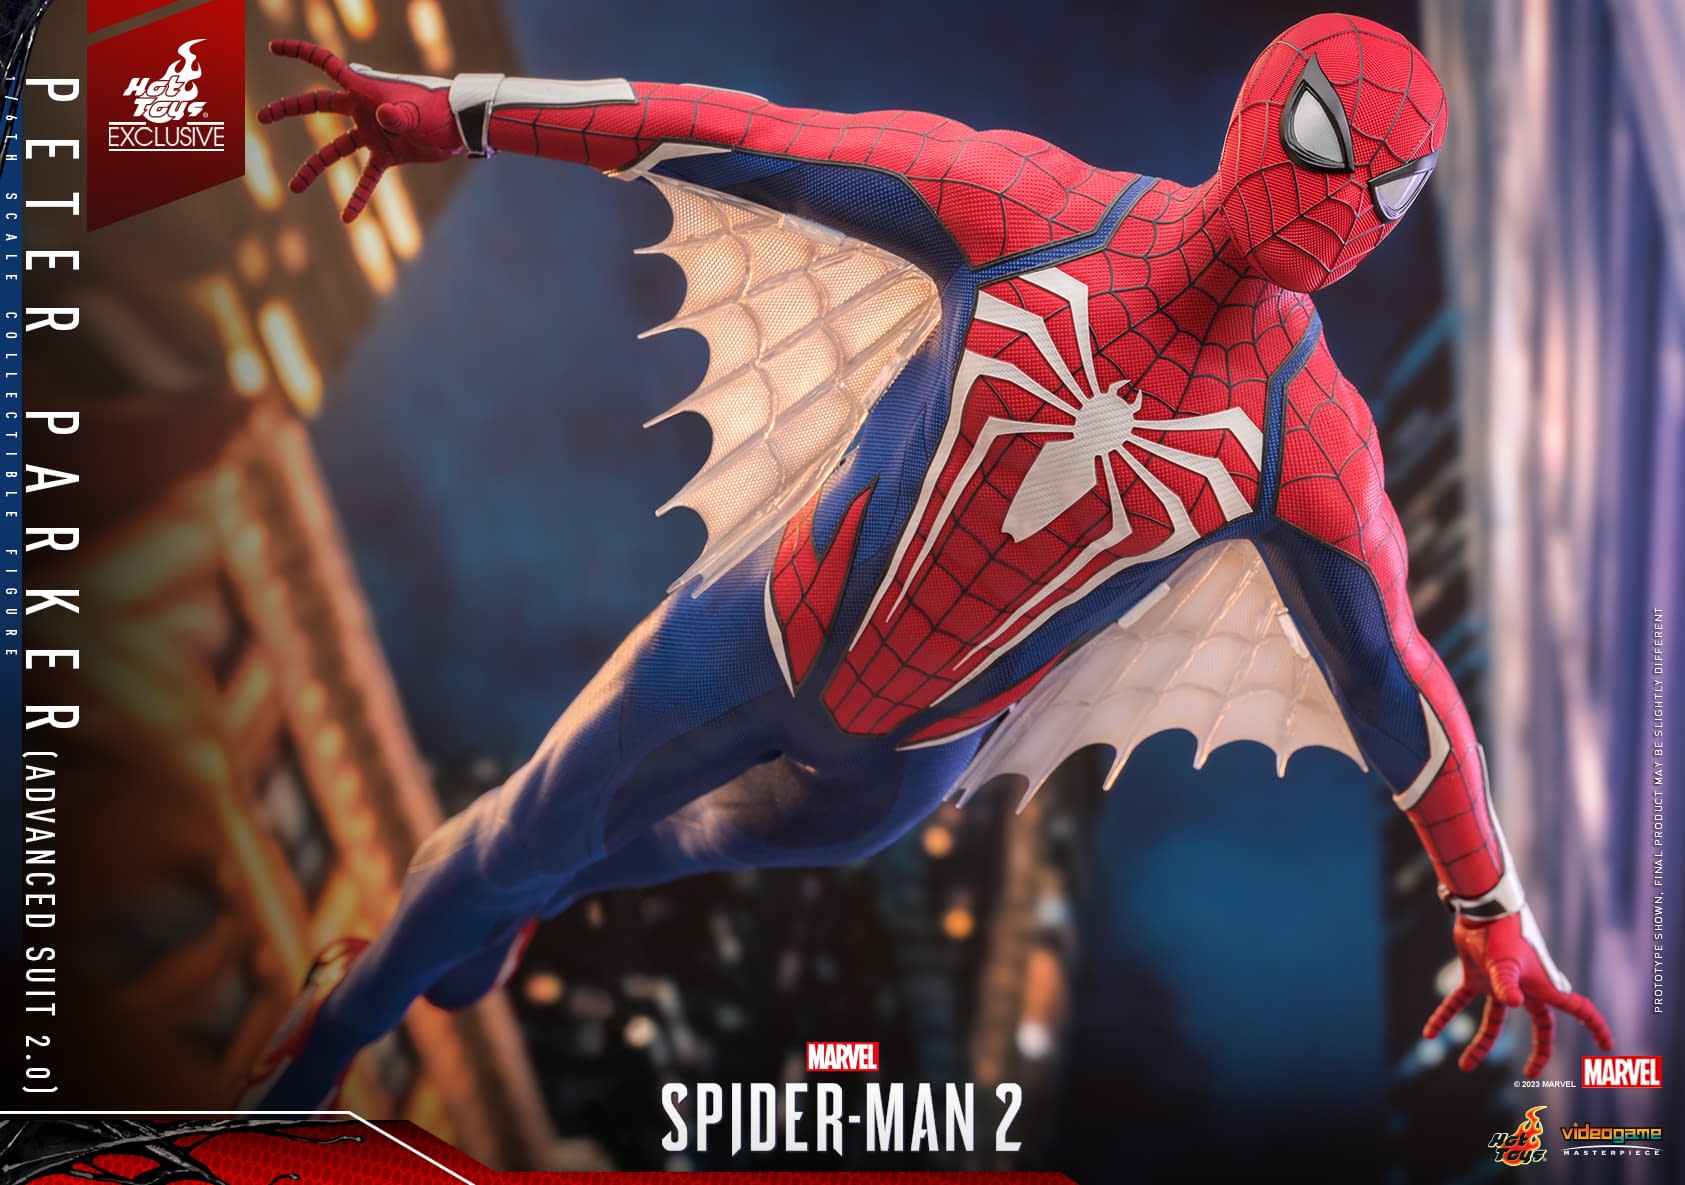 Marvel's Spider-Man 2 1/6 Scale Figures Coming Soon from Hot Toys